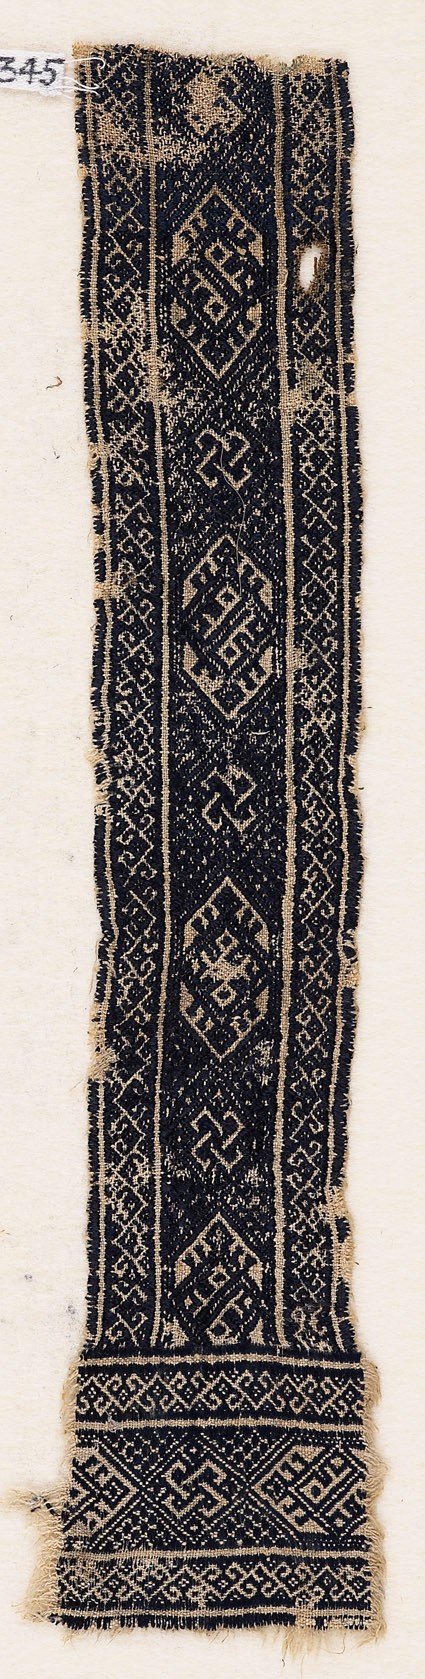 Textile fragment with interlacing knots, cartouches, diamond-shapes, and hooksfront